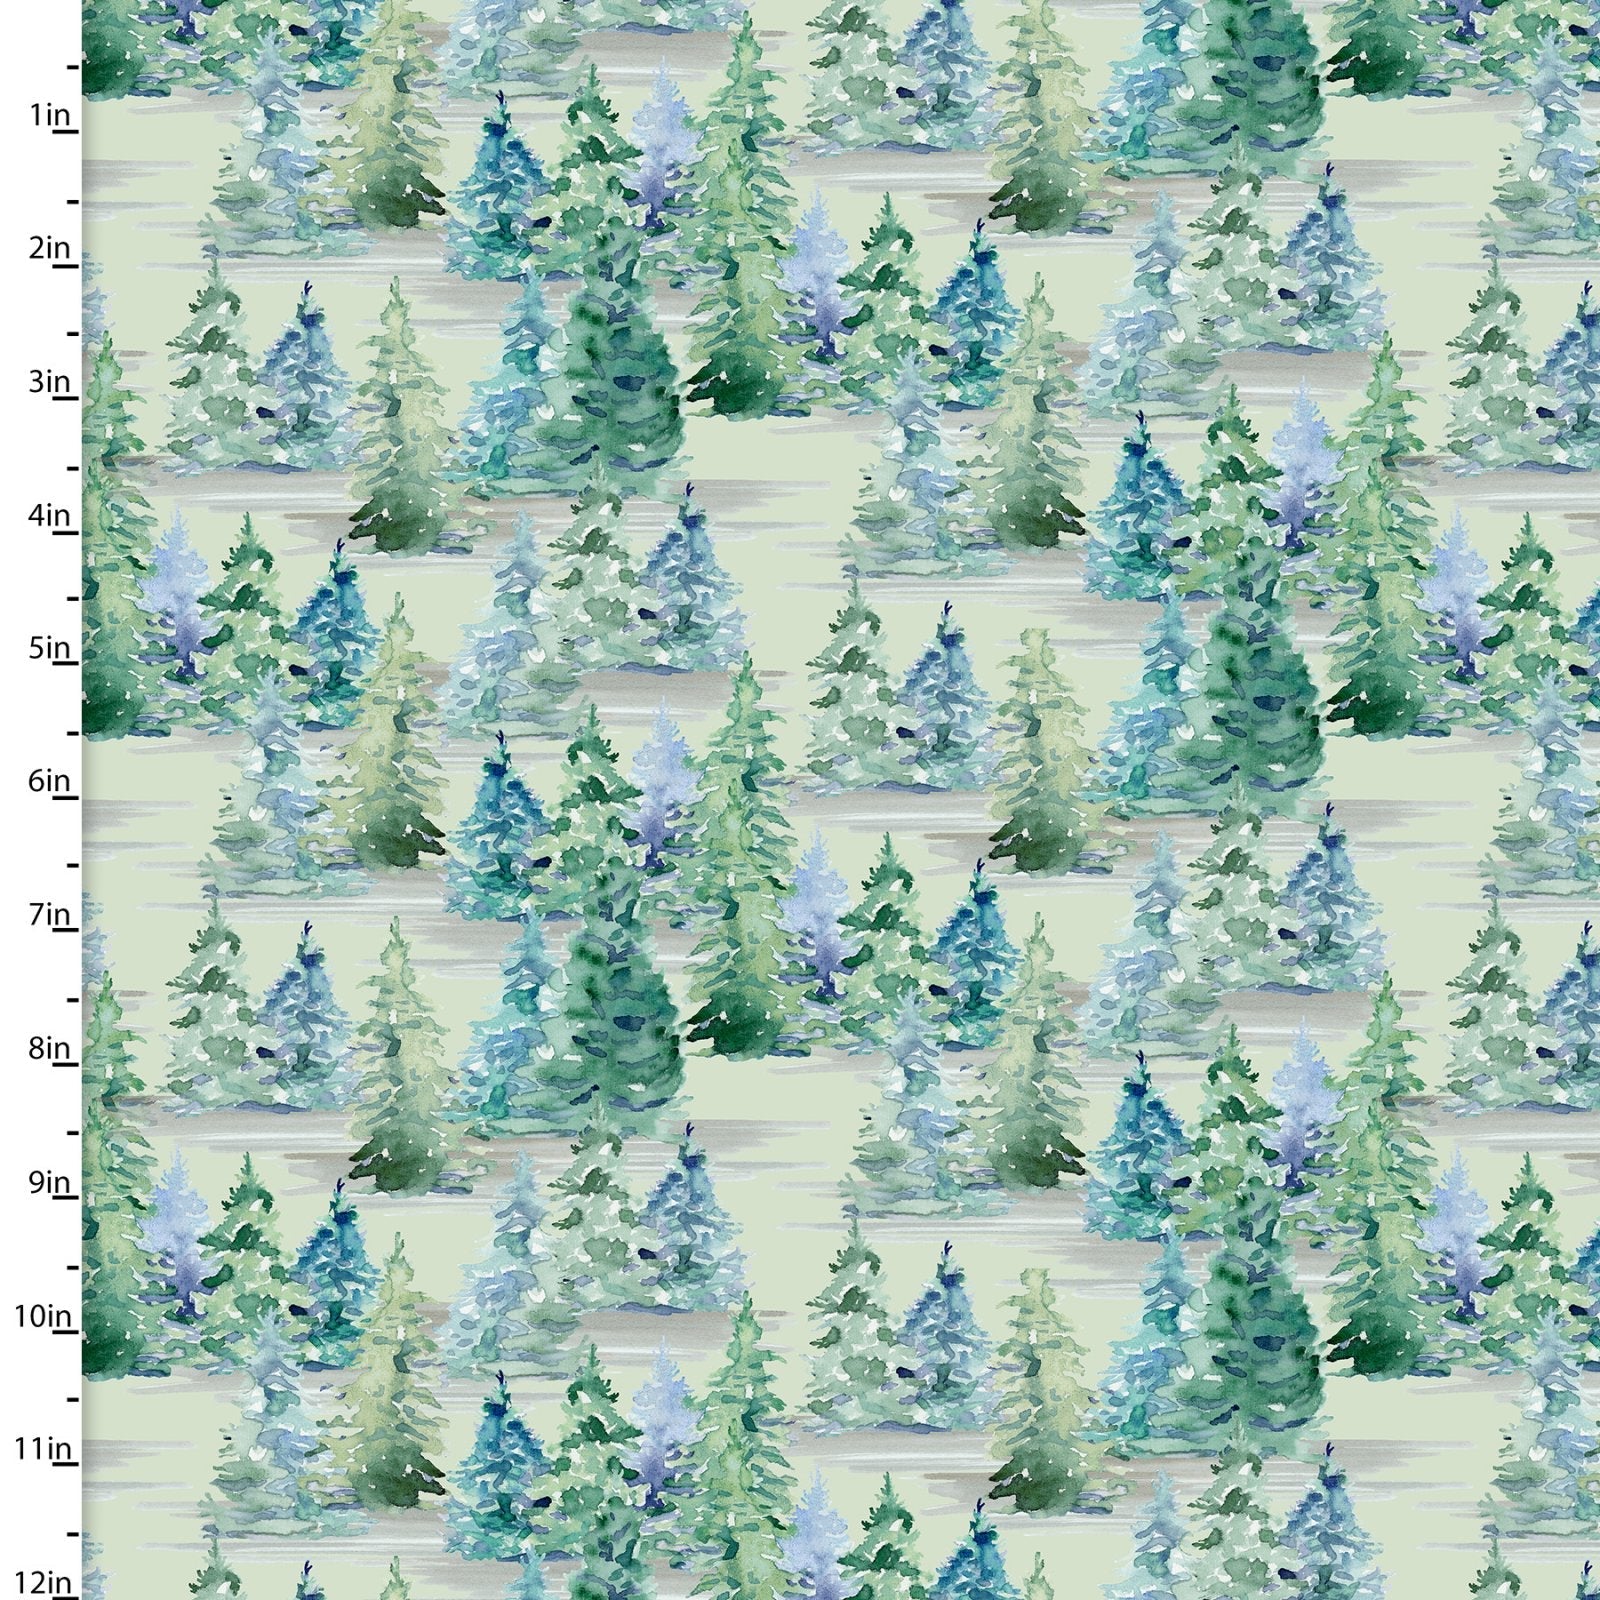 Green forest fern trees on a green cotton fabric - Forest Friends by 3 Wishes